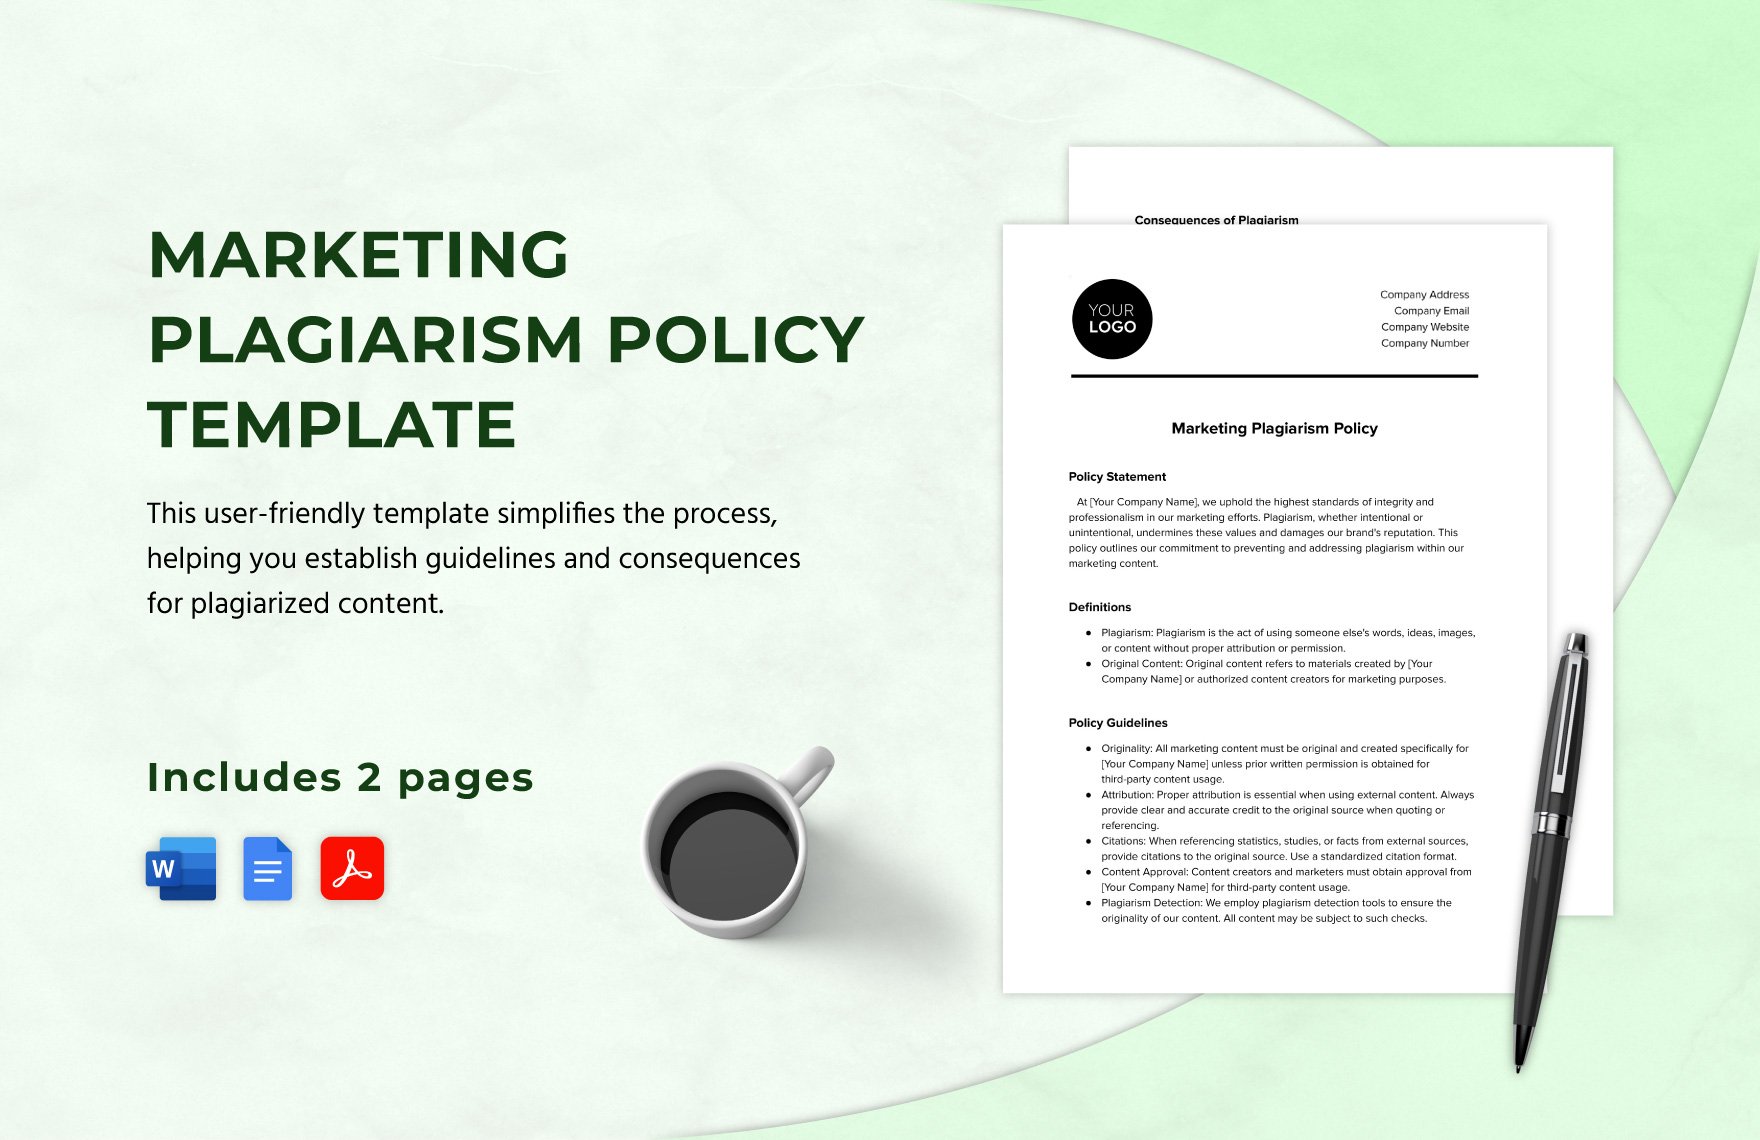 Marketing Plagiarism Policy Template